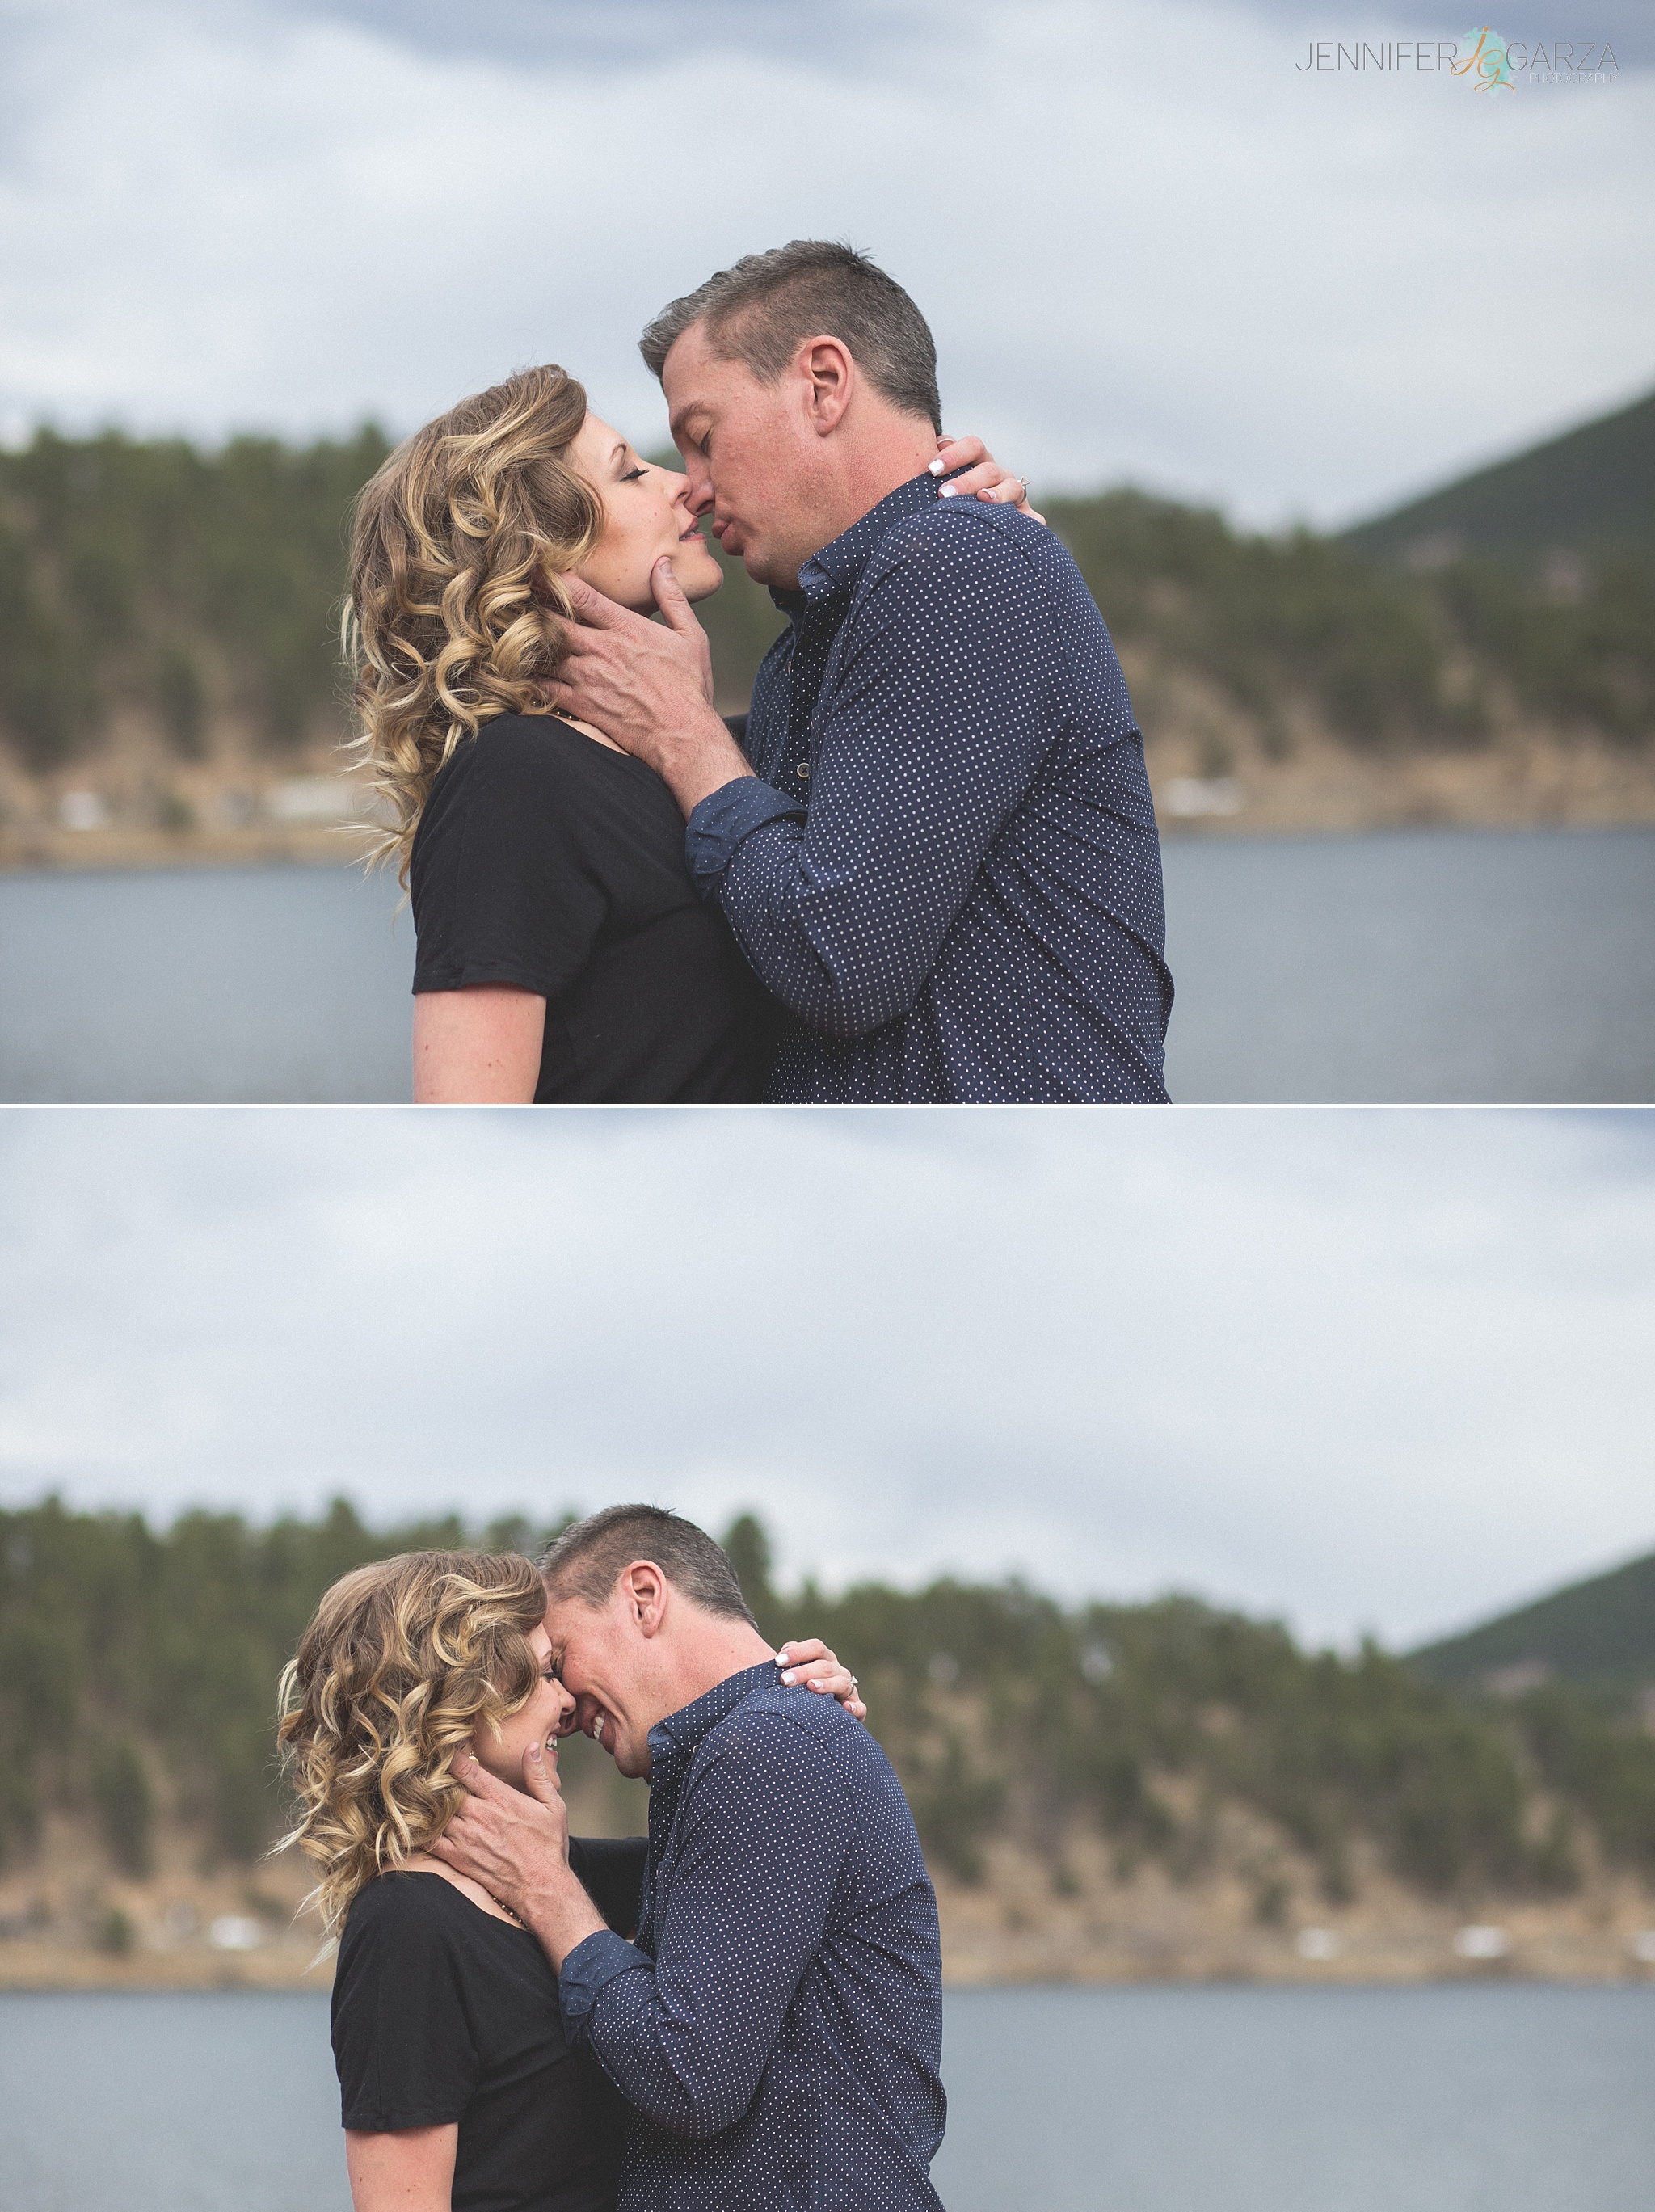 Whitney & Chris were such an amazing couple during their Epic Engagement Shoot at Evergreen Lake House.